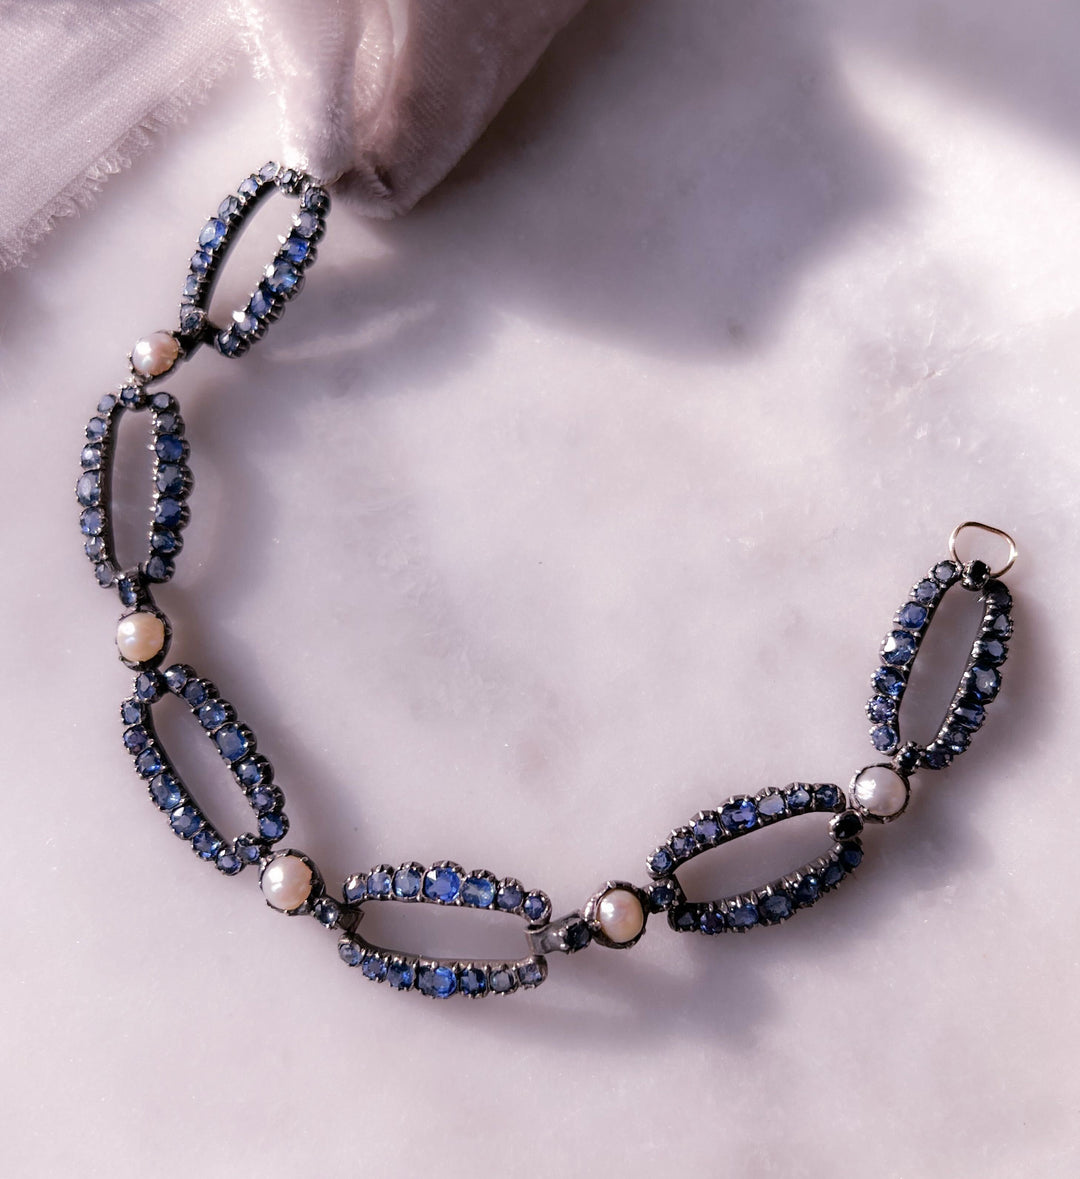 Sumptuous Sapphire and Pearl Necklace